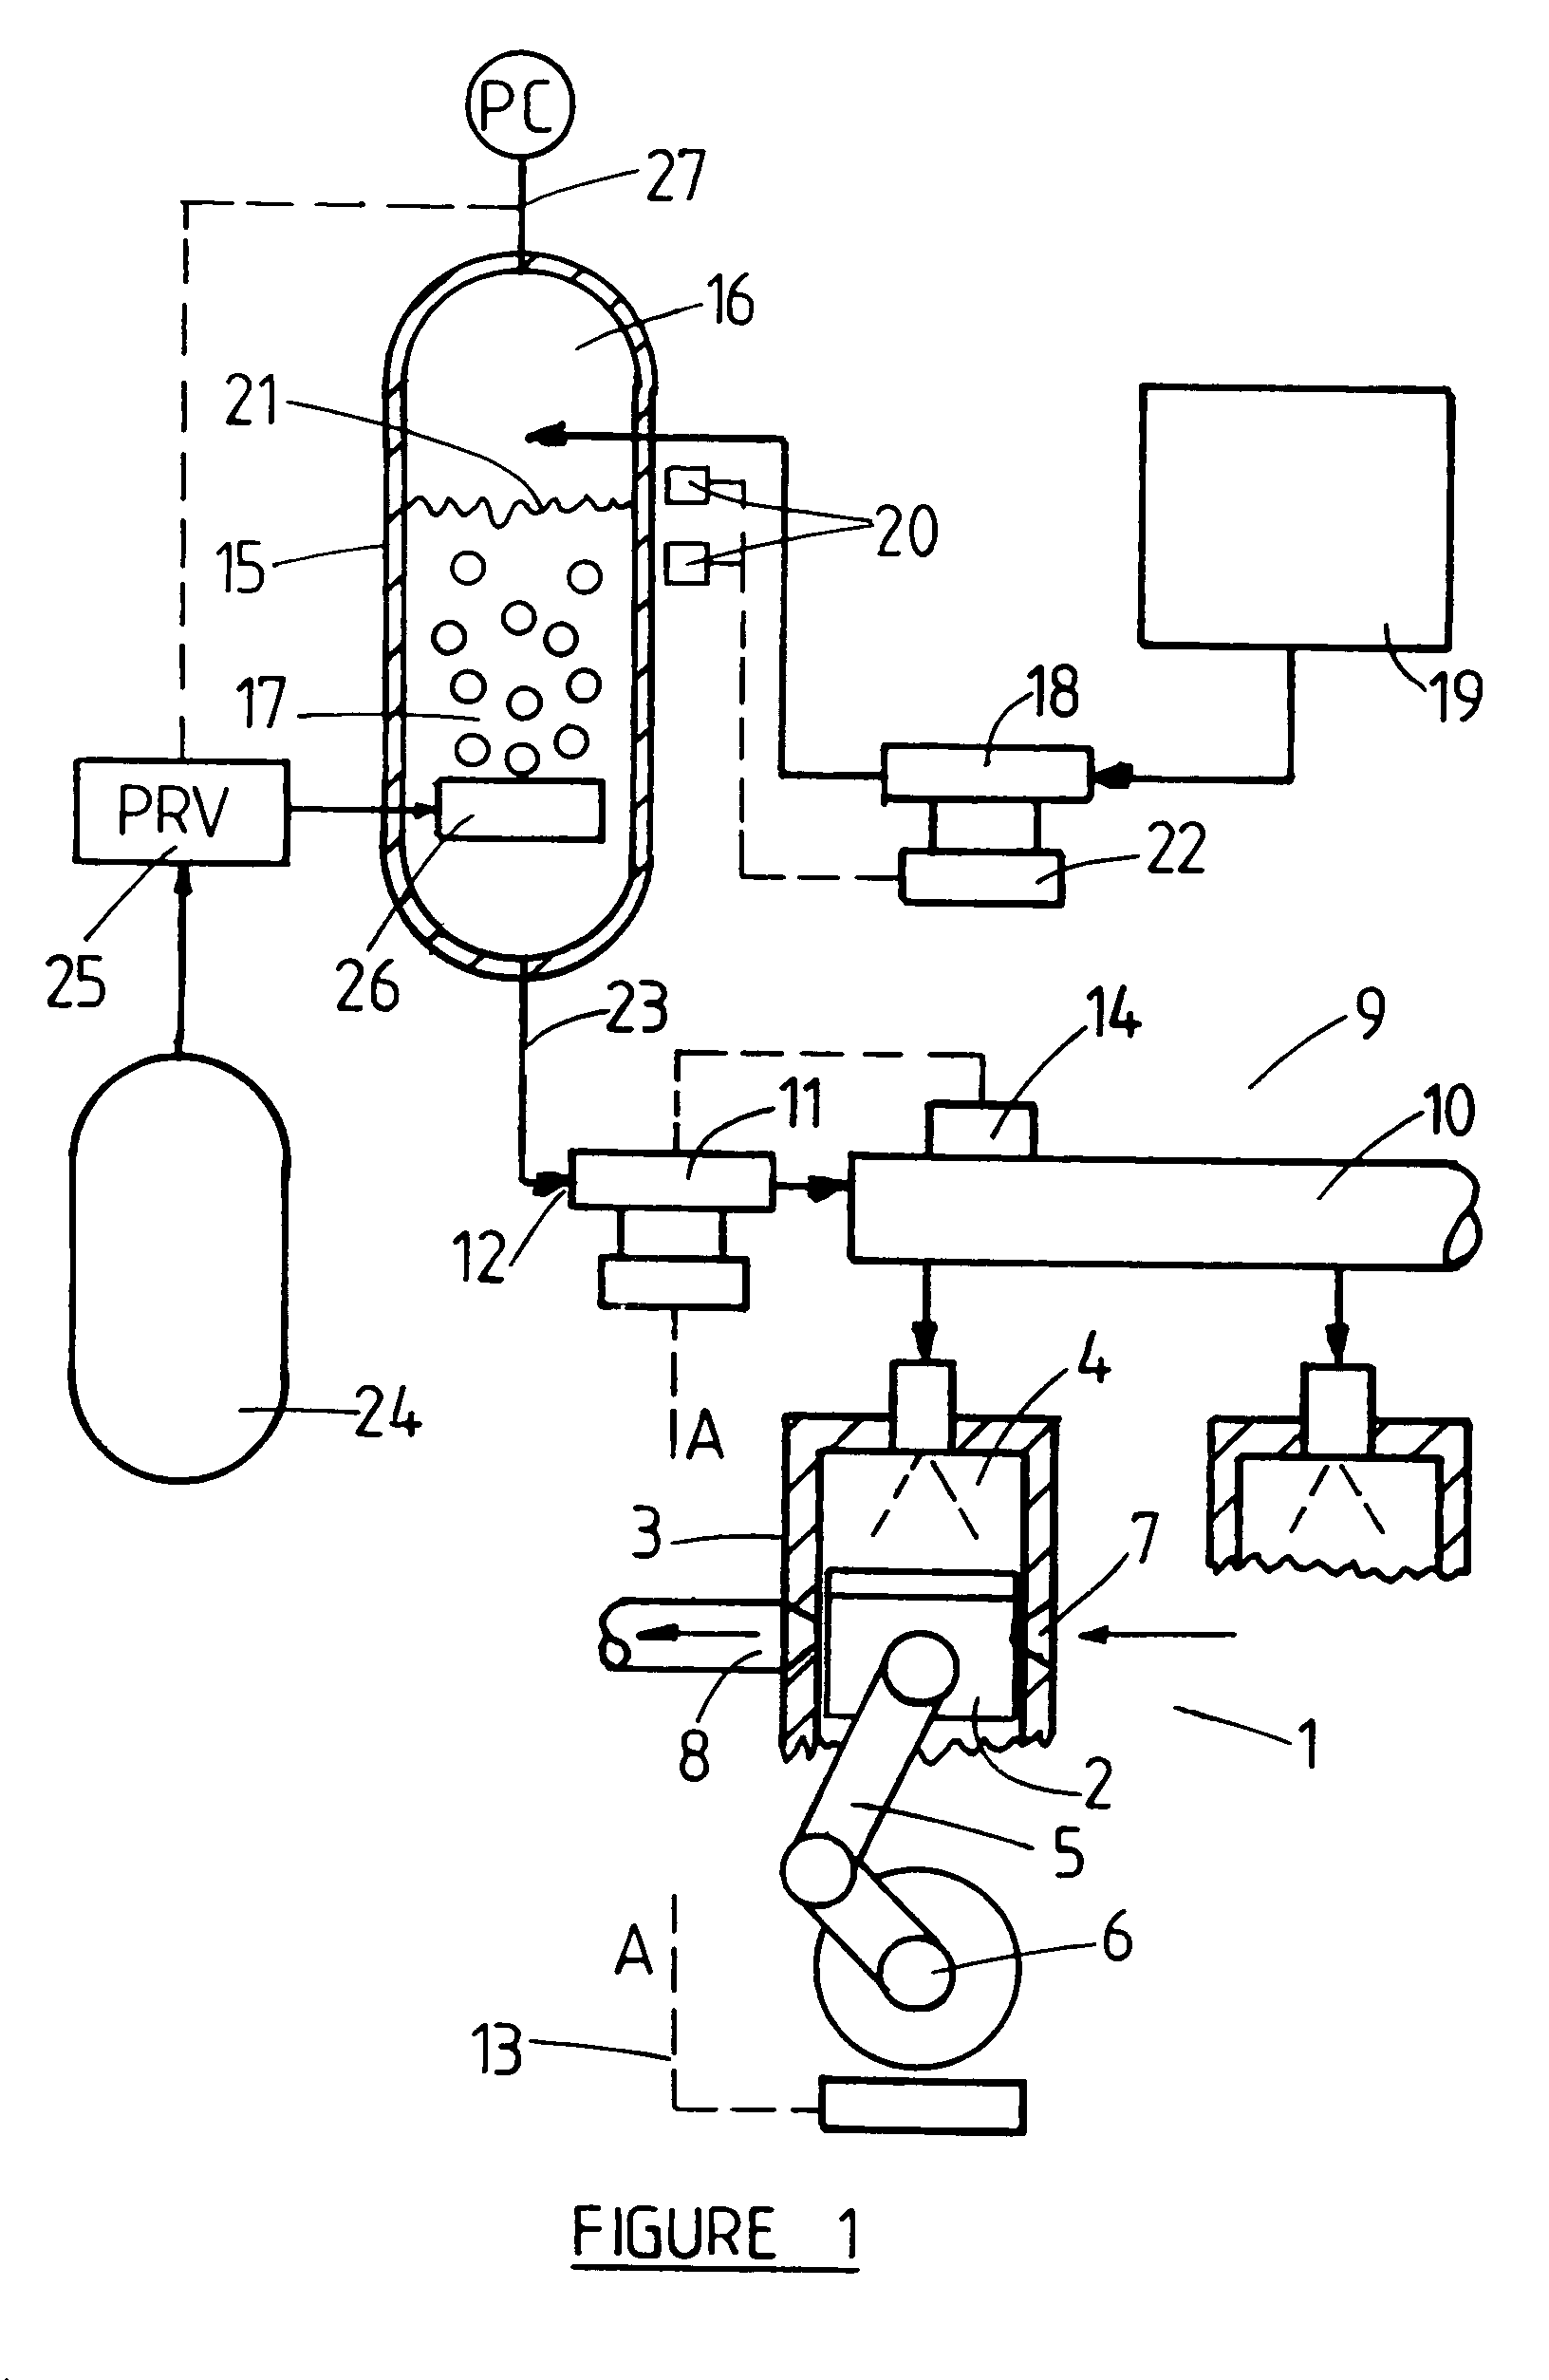 Supplementary slurry fuel atomizer and supply system